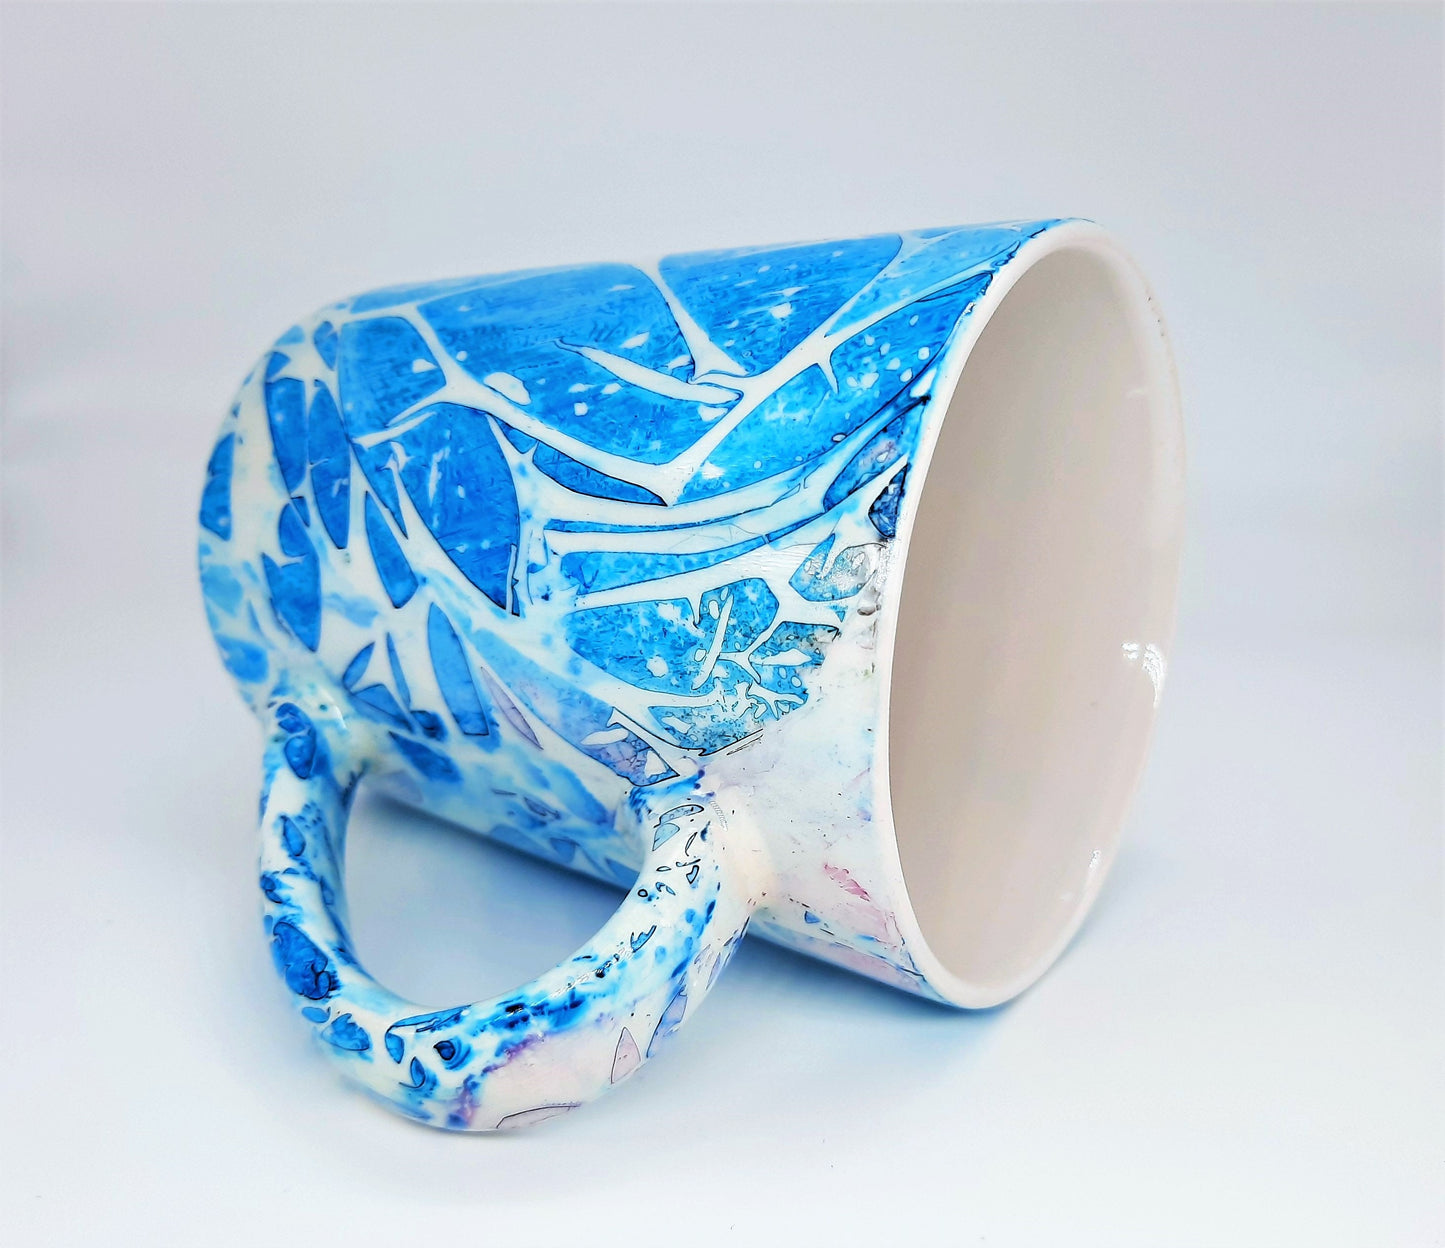 Blue Abstract Alcohol Ink 12 oz Ceramic Coffee Mug, Handpainted and Sealed with Resin, One of a Kind, Unique, Bright